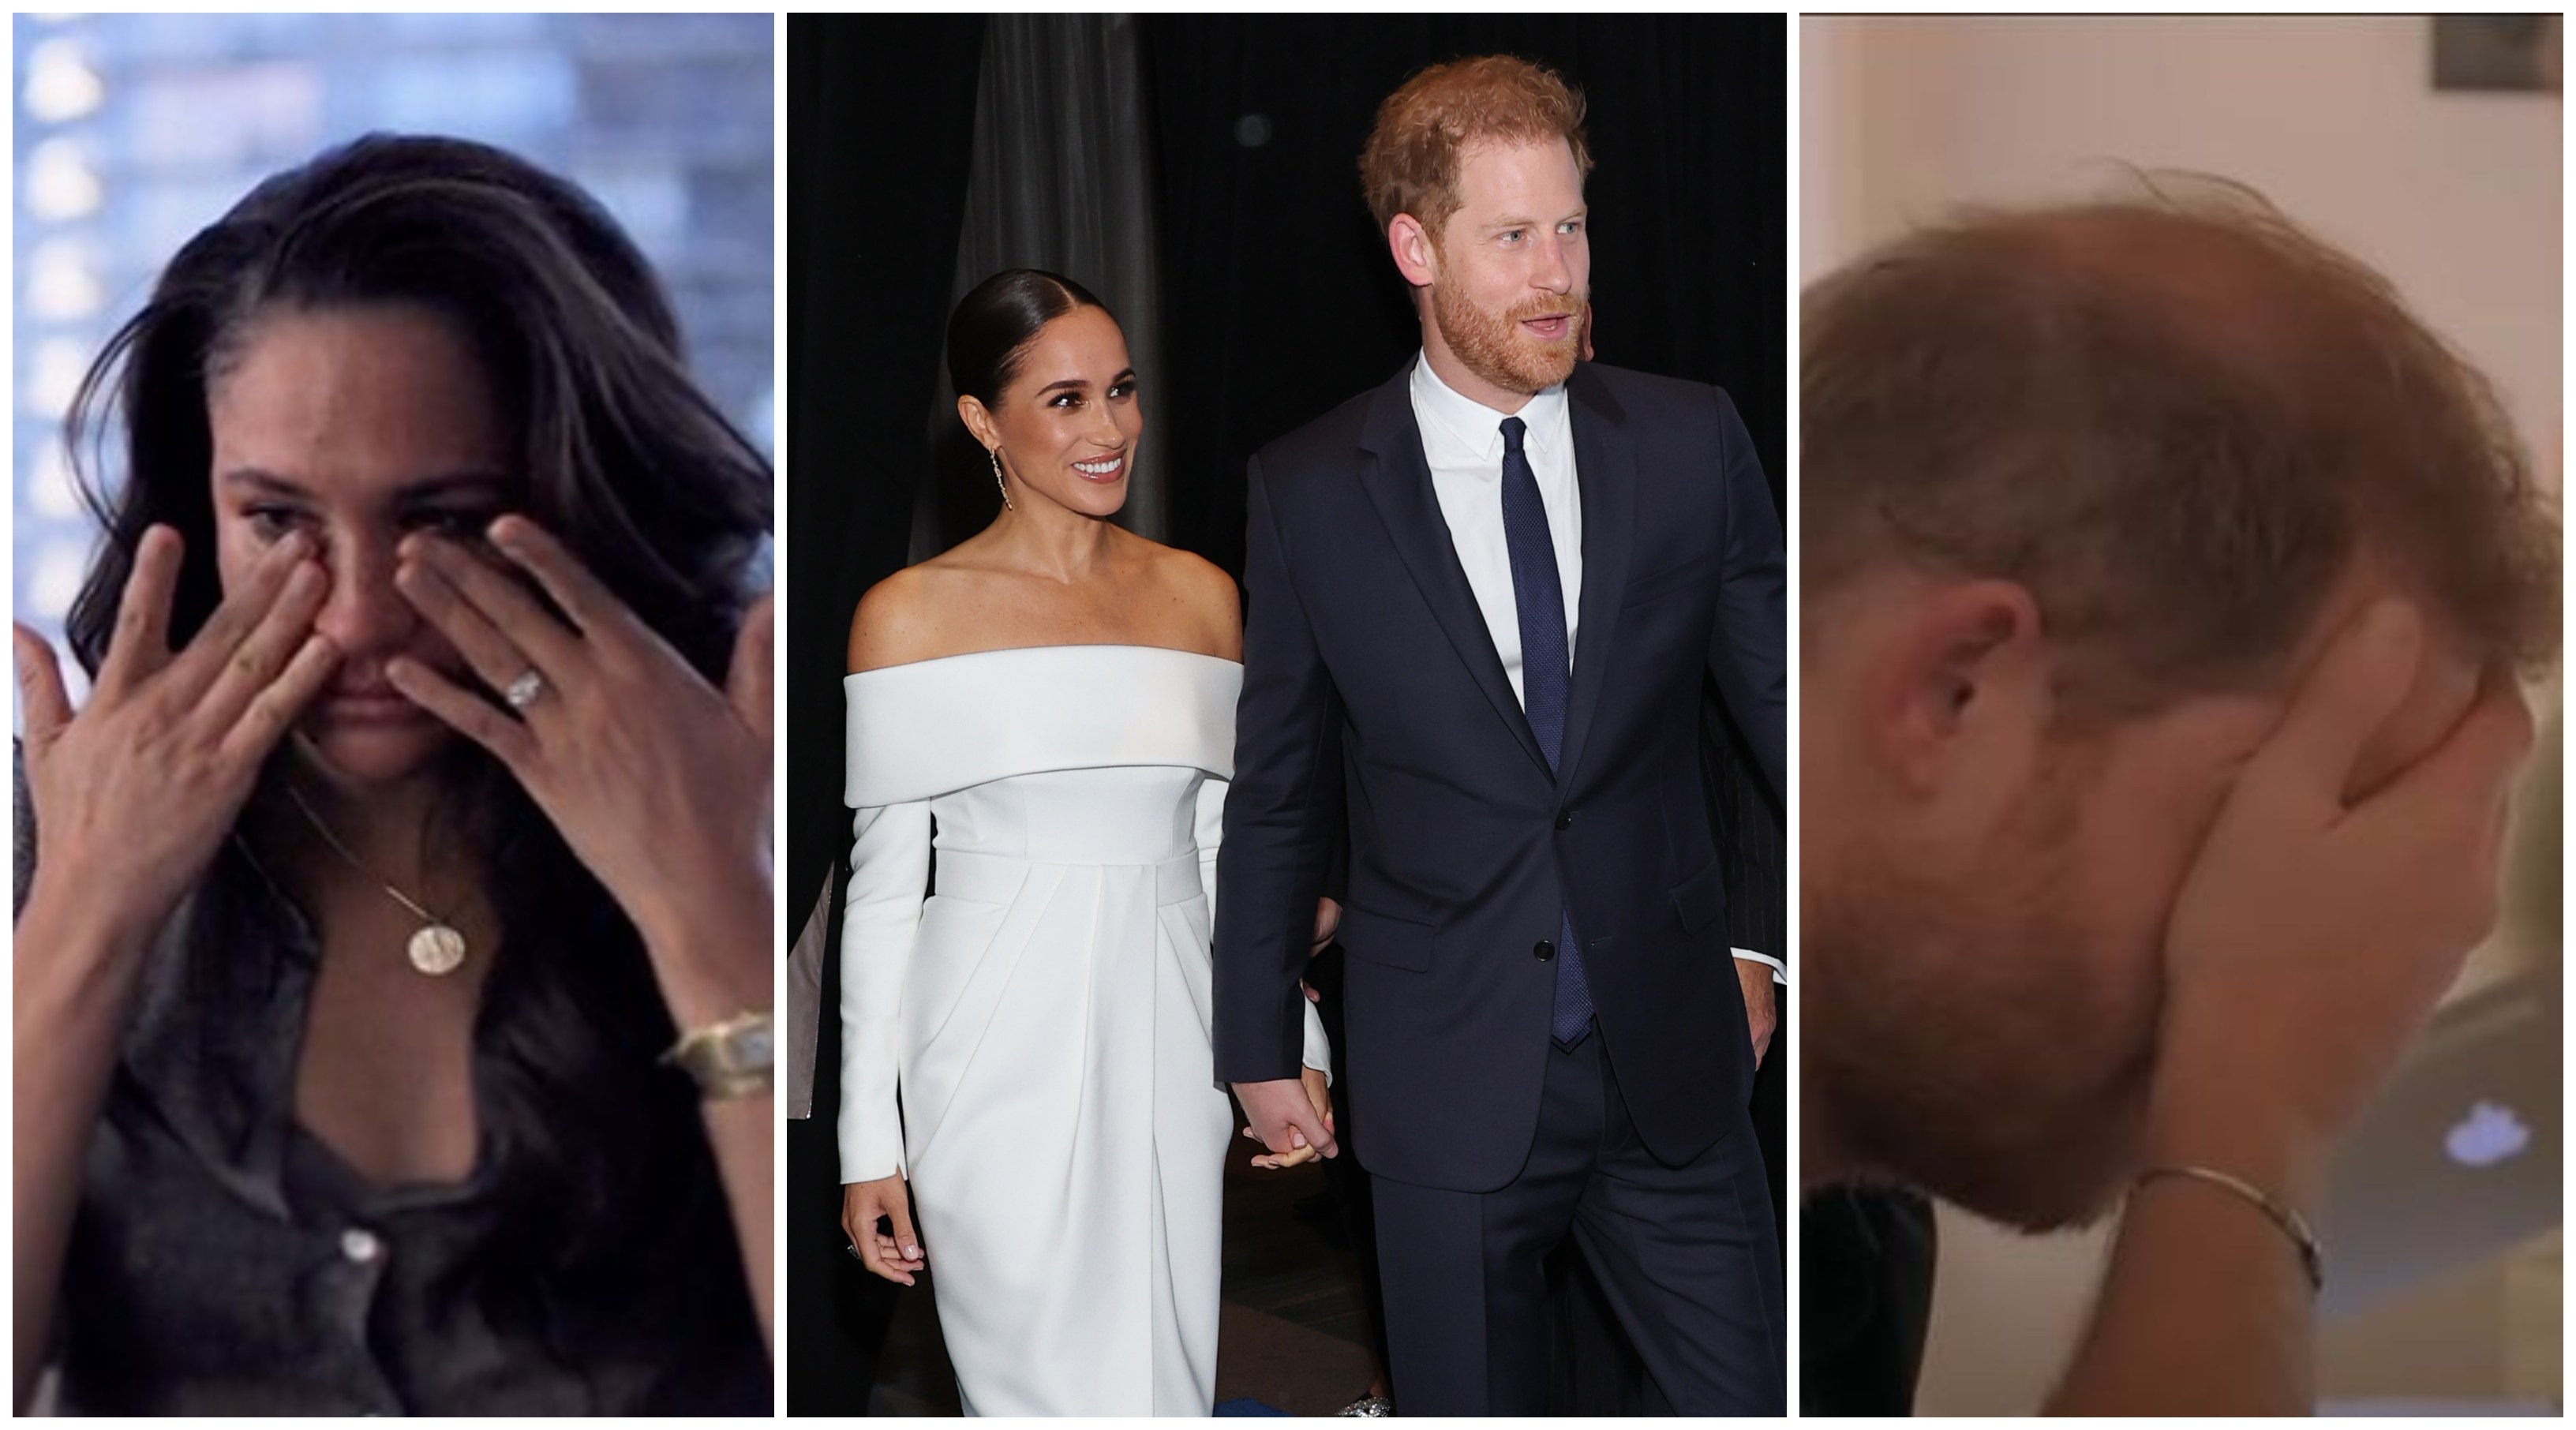 Meghan Markle and Prince Harry’s controversial new Netflix series is causing quite the stir. Photos: Netflix, Getty Images